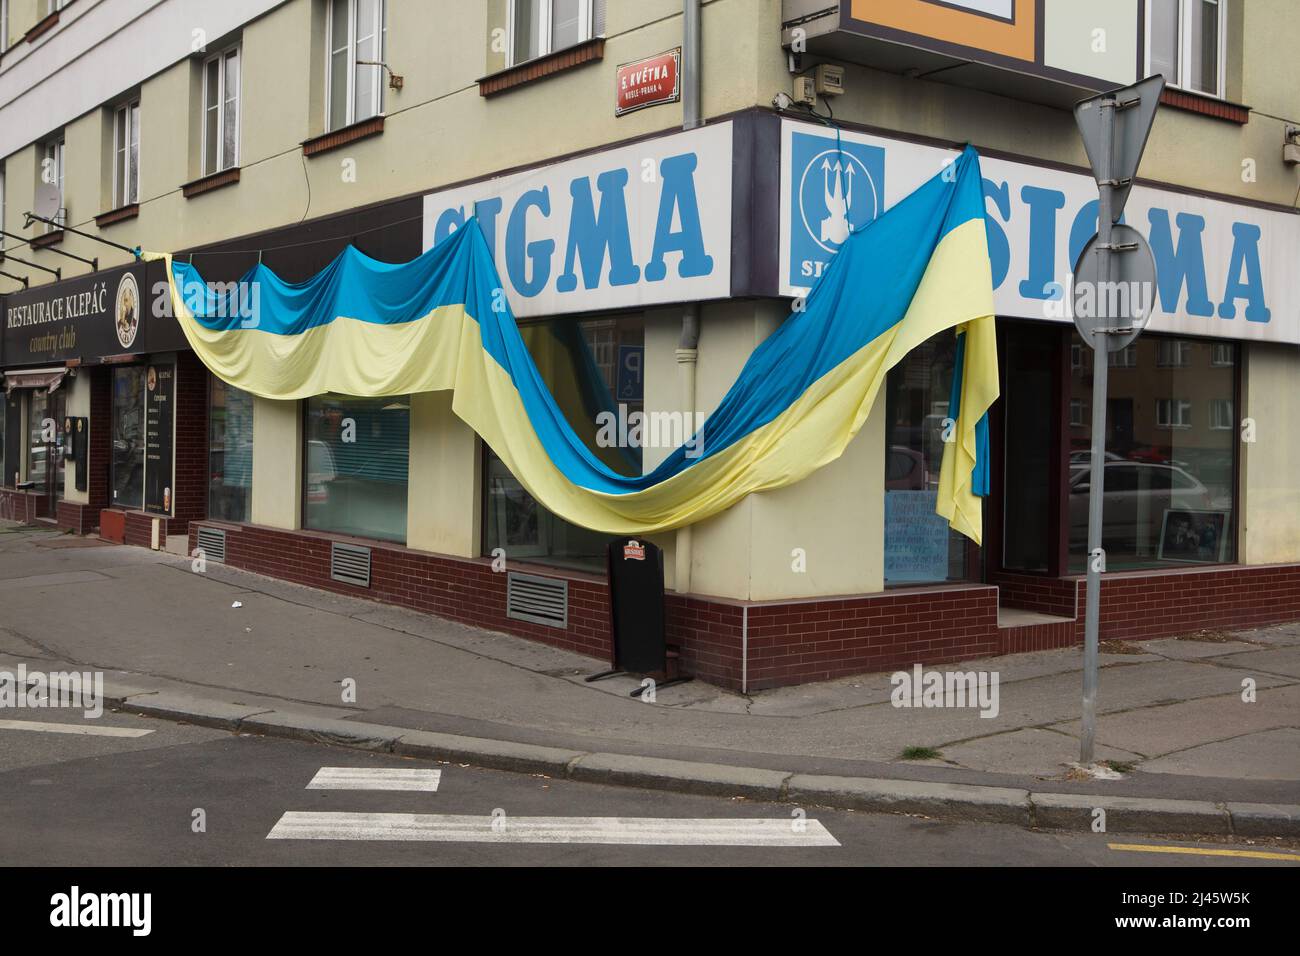 Ukrainian national flag placed on the Sigma Store in Pankrác district in Prague, Czech Republic, pictured on 15 March 2022. The huge flag was hung to support Ukrainian refugees in the Czech Republic and to protest against the Russian invasion of Ukraine in 2022. Stock Photo